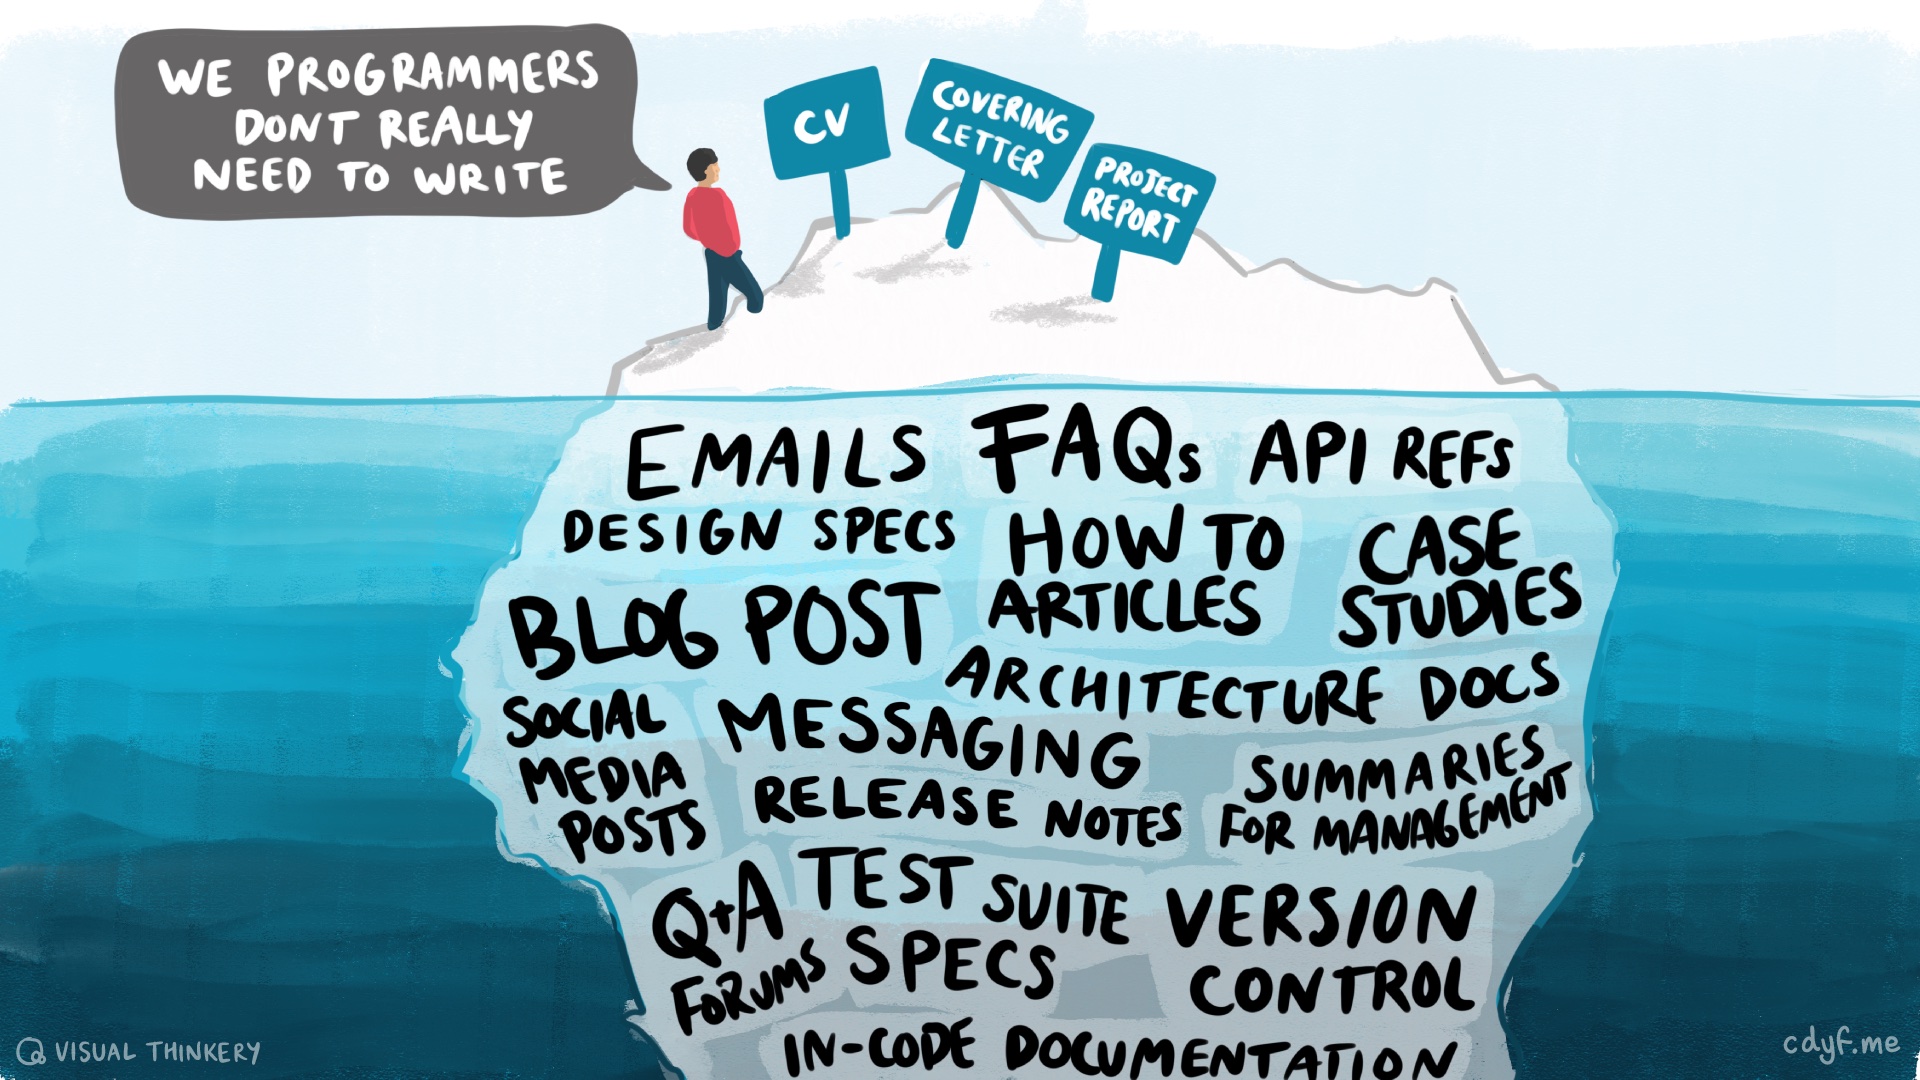 As a student you might be focussed on the tip of the natural language iceberg most visible at University: CV’s, covering letters and longer project reports for your coursework assignments. These are just the tip of the iceberg, underneath is a tonne of other communication you’ll need to write (and read) to be a successful engineer or scientist: emails, bug reports, FAQs, case studies, white-papers, design specifications, in-code documentation, marketing, mainstream news and social media. The list goes on and on. So, there is a lot more to the natural language iceberg than meets the eye. Natural language iceberg by Visual Thinkery is licensed under CC-BY-ND